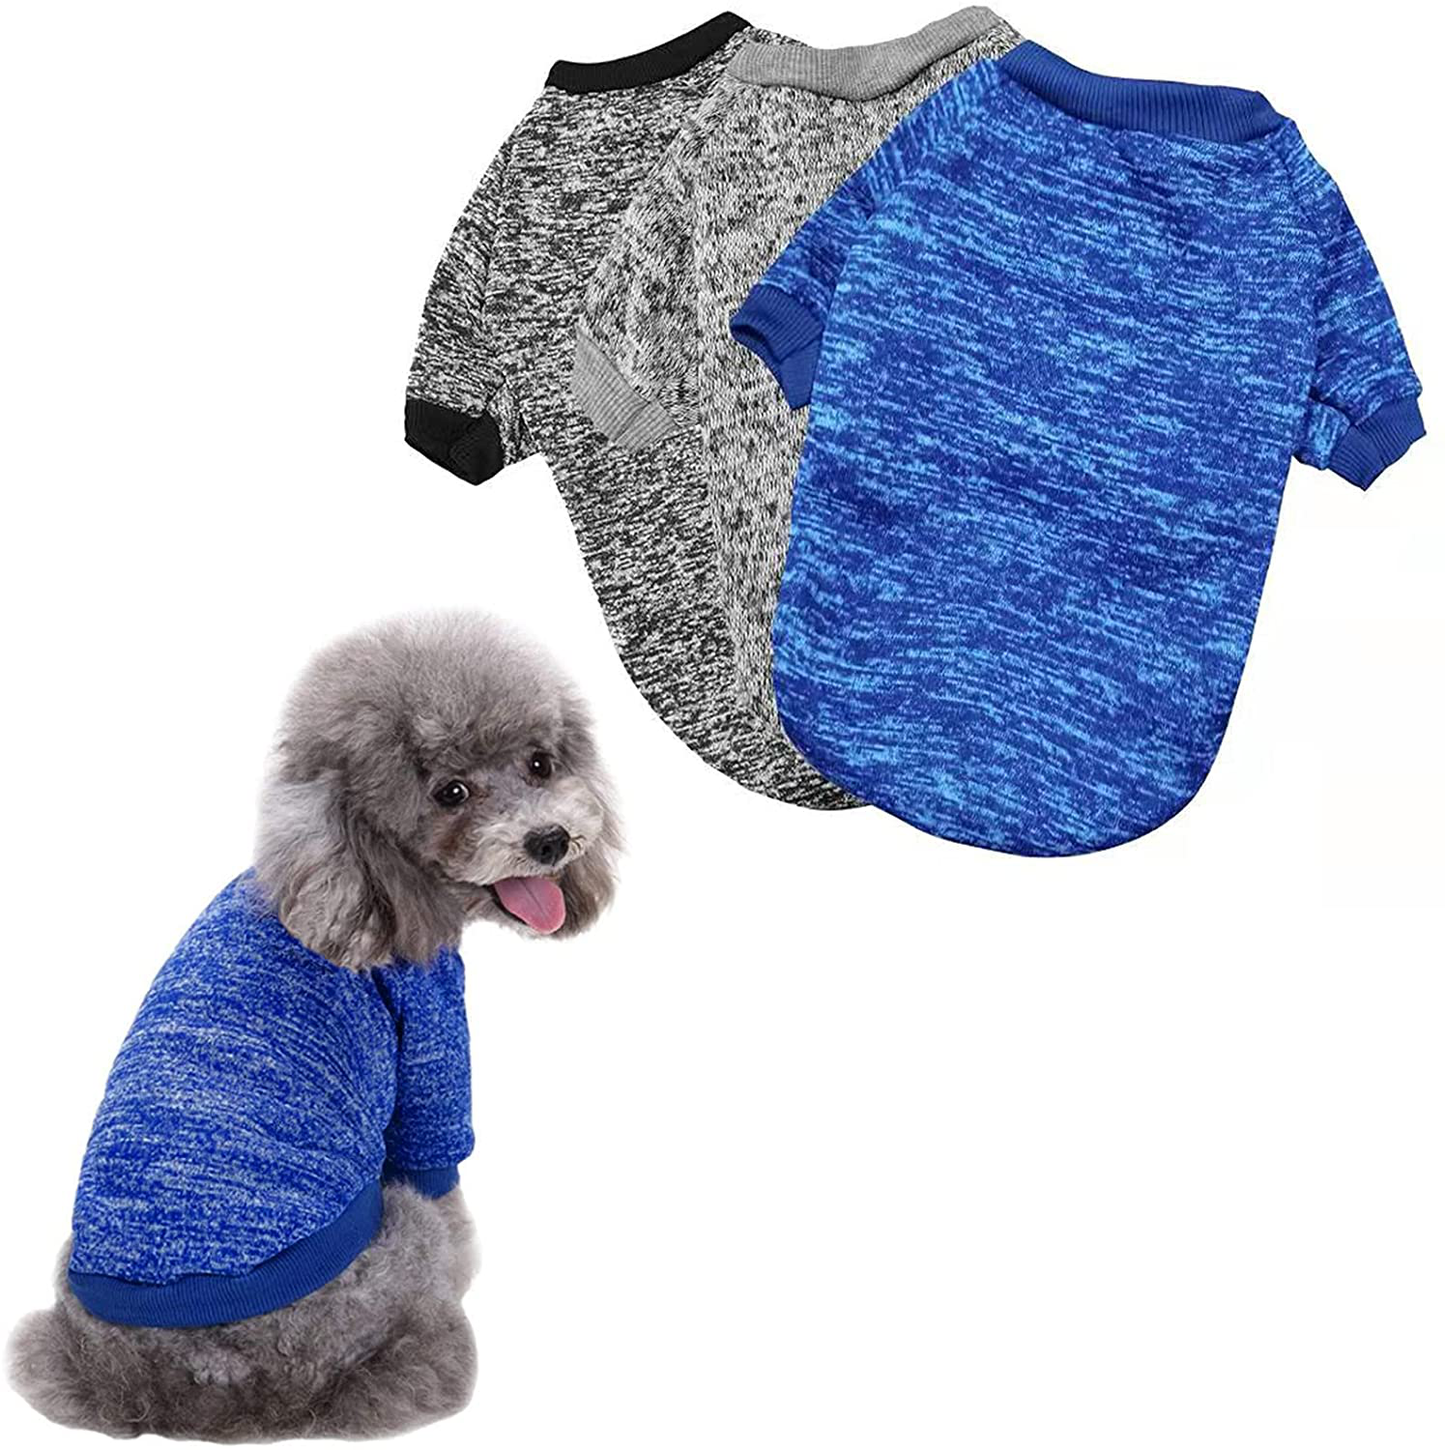 Pack of 3 Dog Hoodies Knitwear Dog Sweaters Stretchy Pet Clothes Soft Puppy Pullover Cat Hooded Shirts Casual Dog Sweatshirts for Small Dogs Cats Warm Dog Shirts Winter Puppy Sweater Animals & Pet Supplies > Pet Supplies > Dog Supplies > Dog Apparel K ERATISNIK Dark Colors Medium 